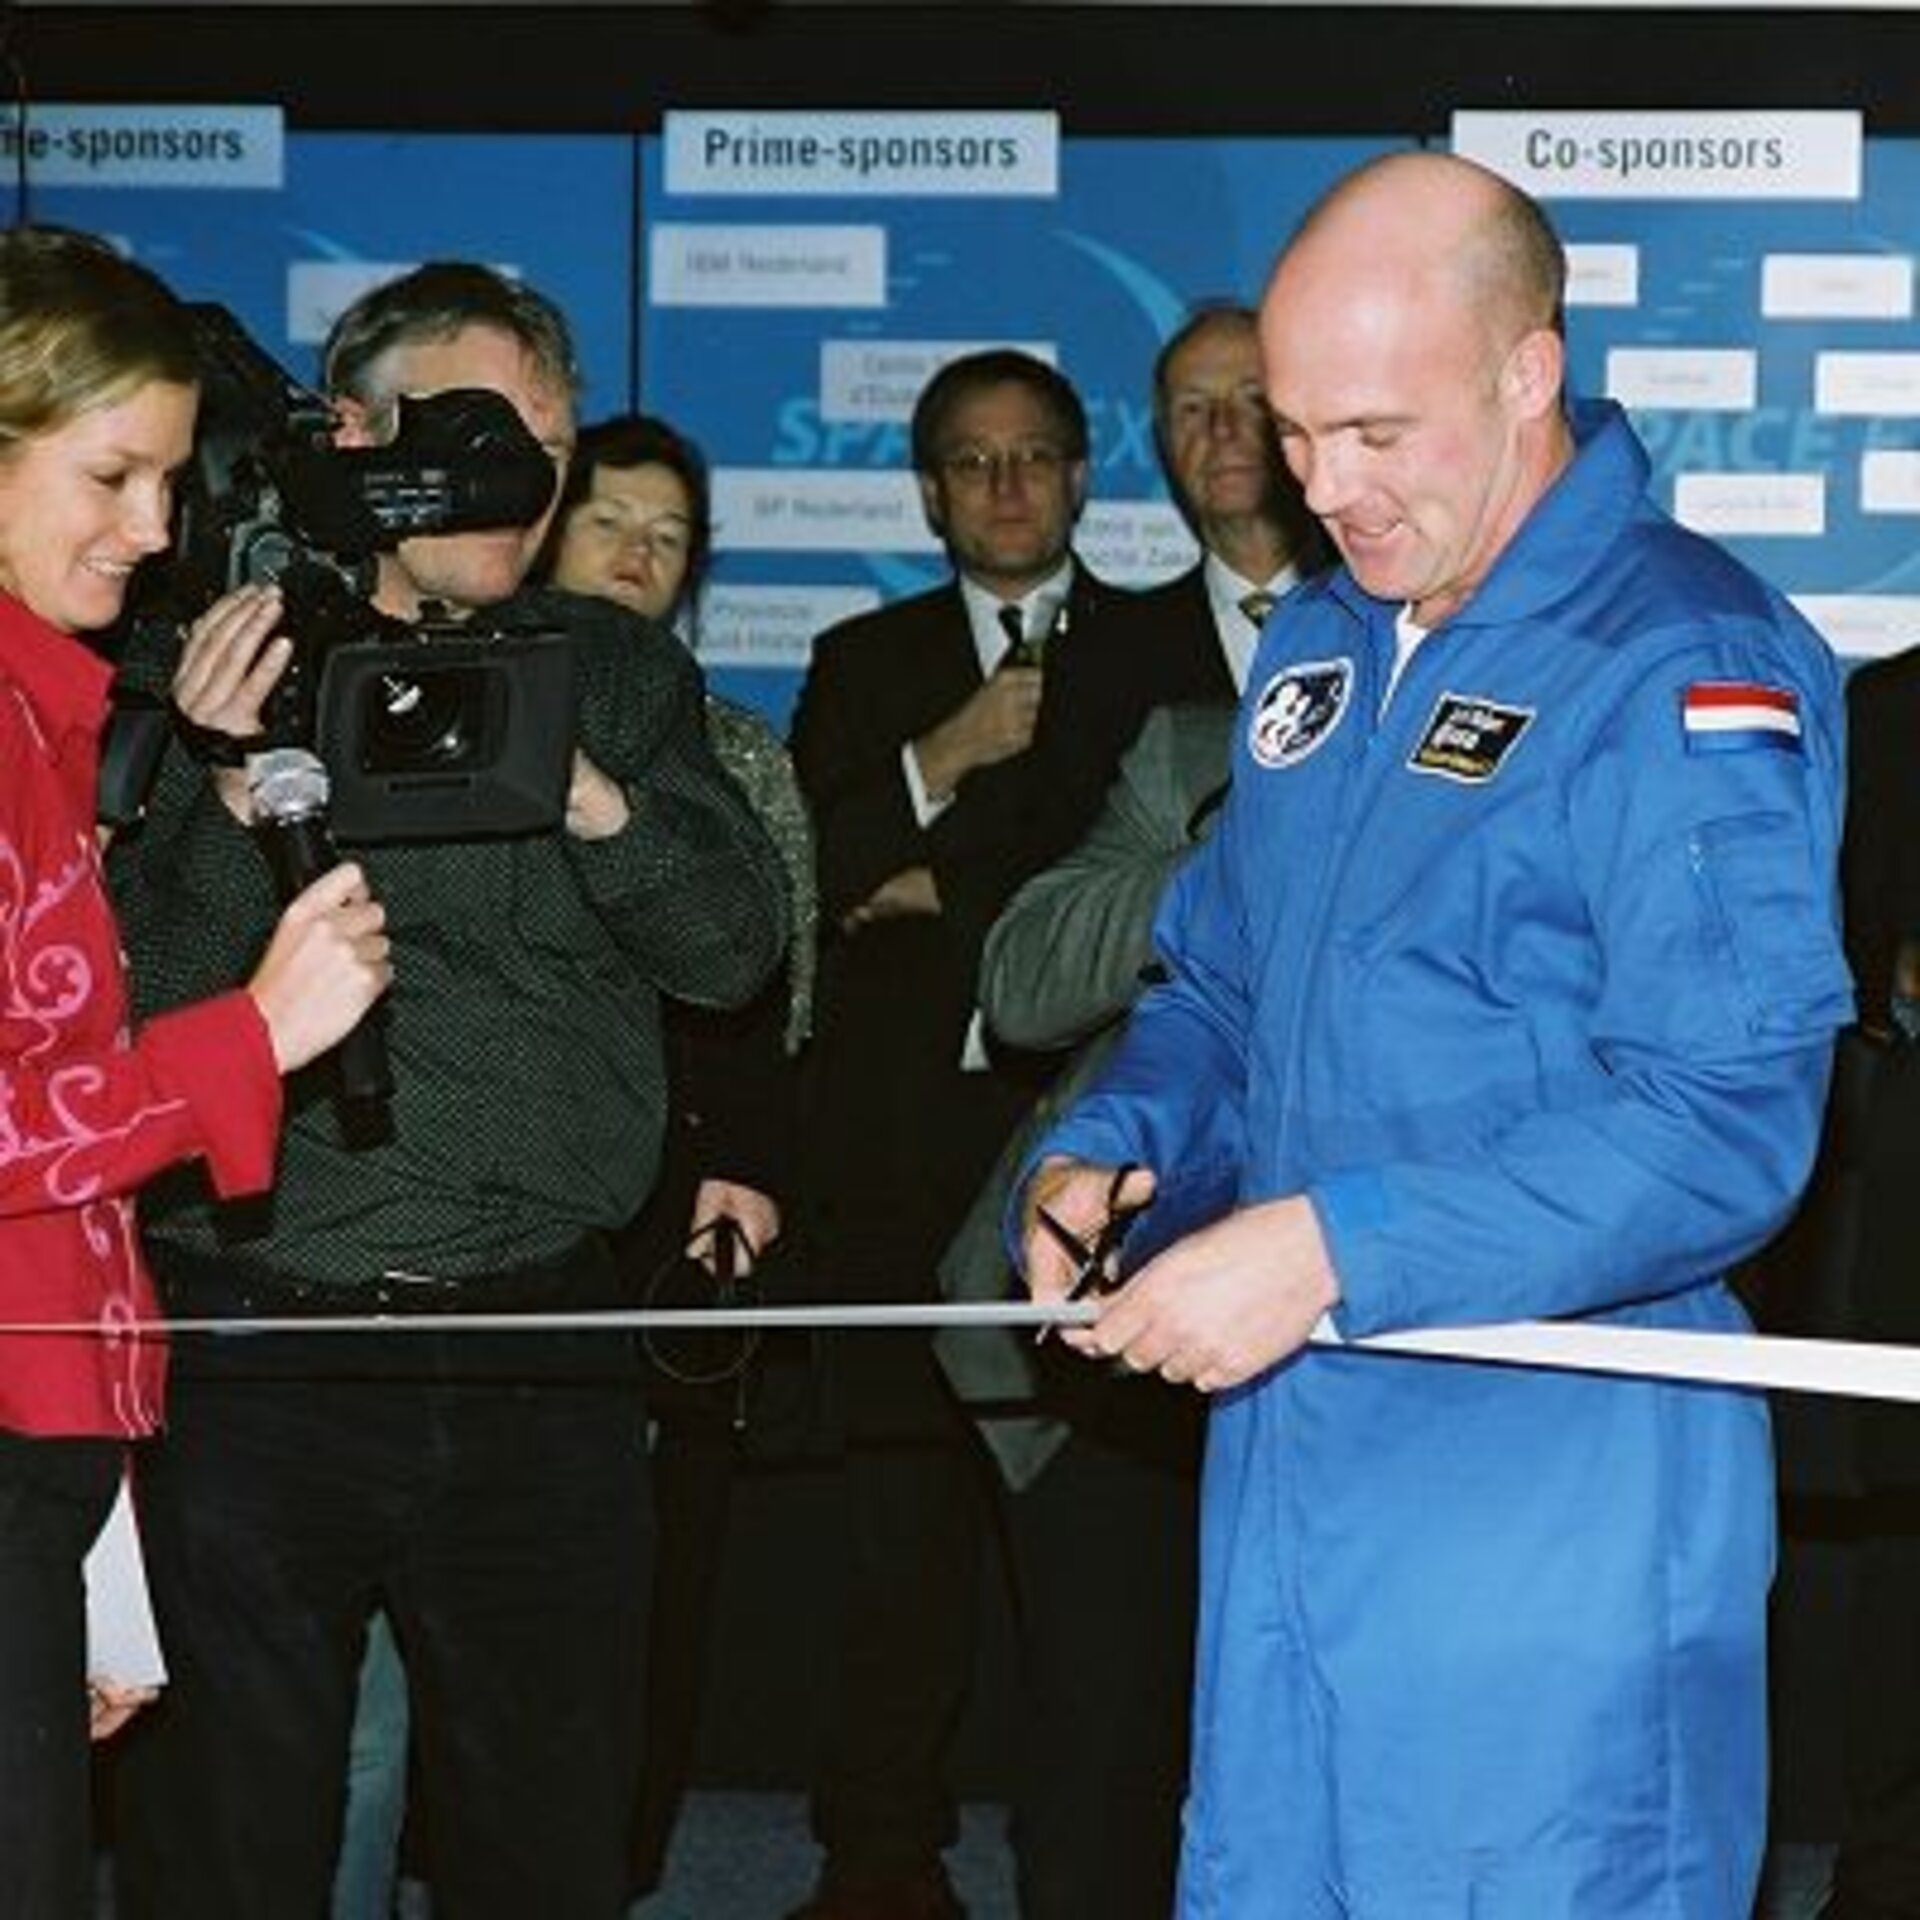 André Kuipers opens an exhibition about his life and his upcoming mission at the Space Expo